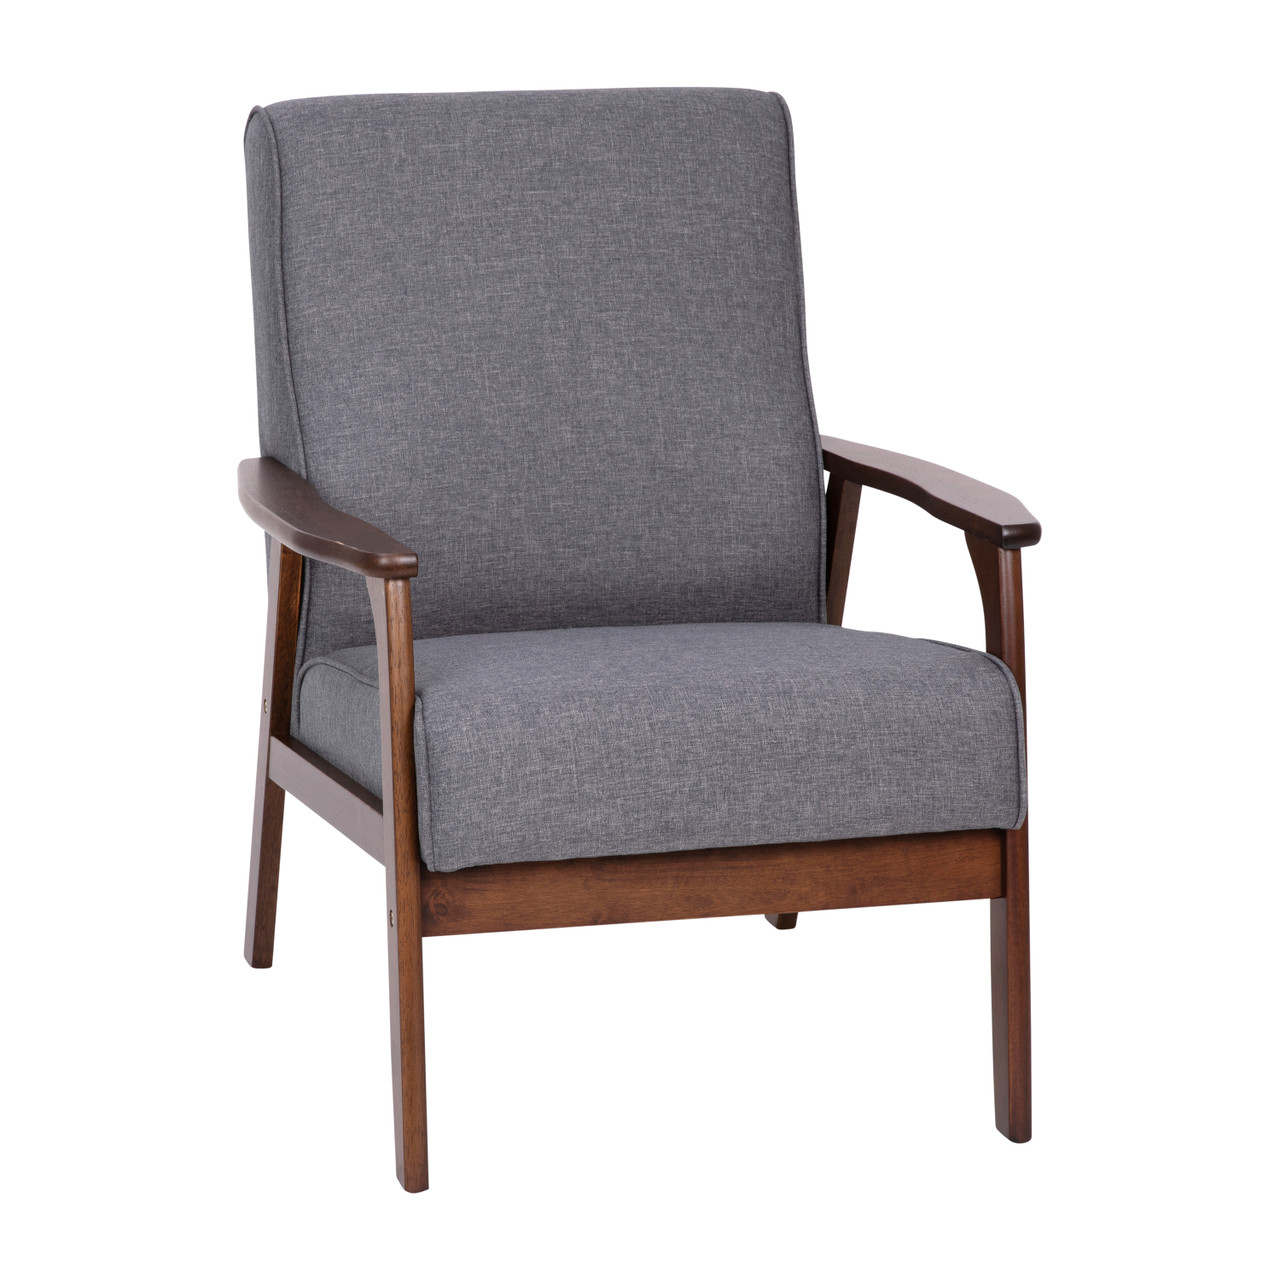 Flash Furniture Langston Commercial Grade Faux Linen Upholstered Mid Century Modern Arm Chair w/ Walnut Finished Wooden Frame & Arms in Gray, Model#